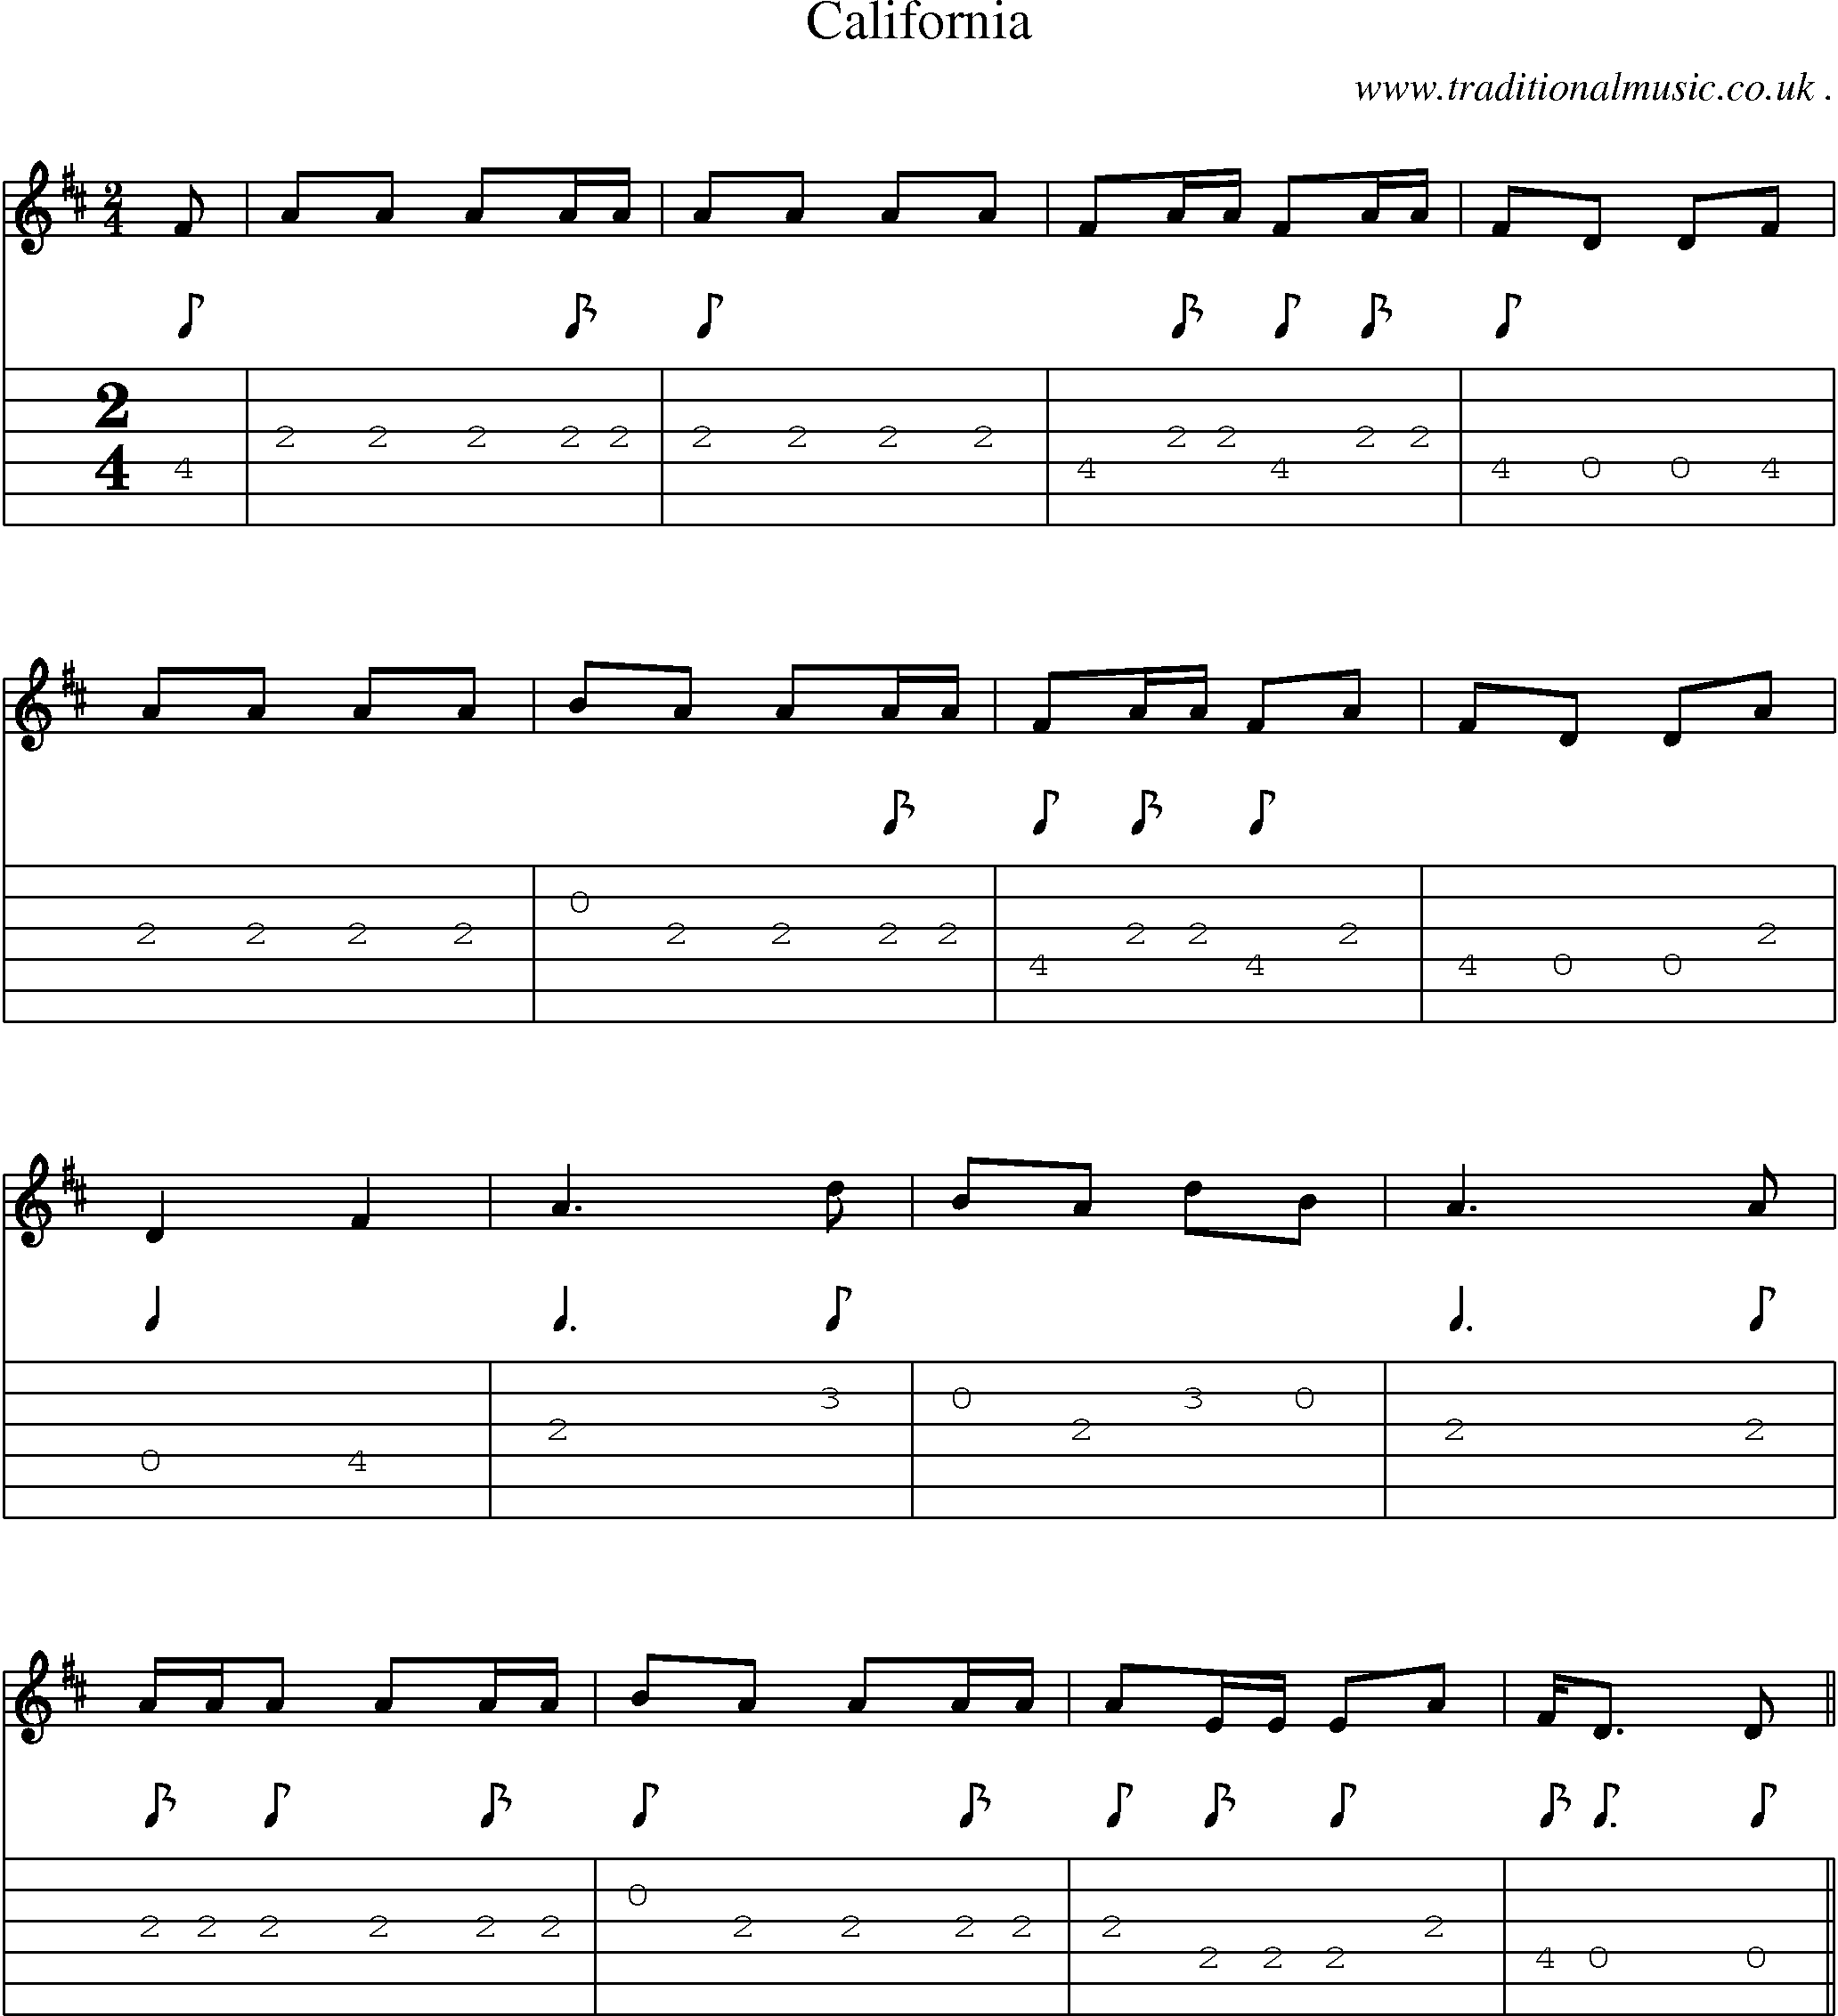 Music Score and Guitar Tabs for California